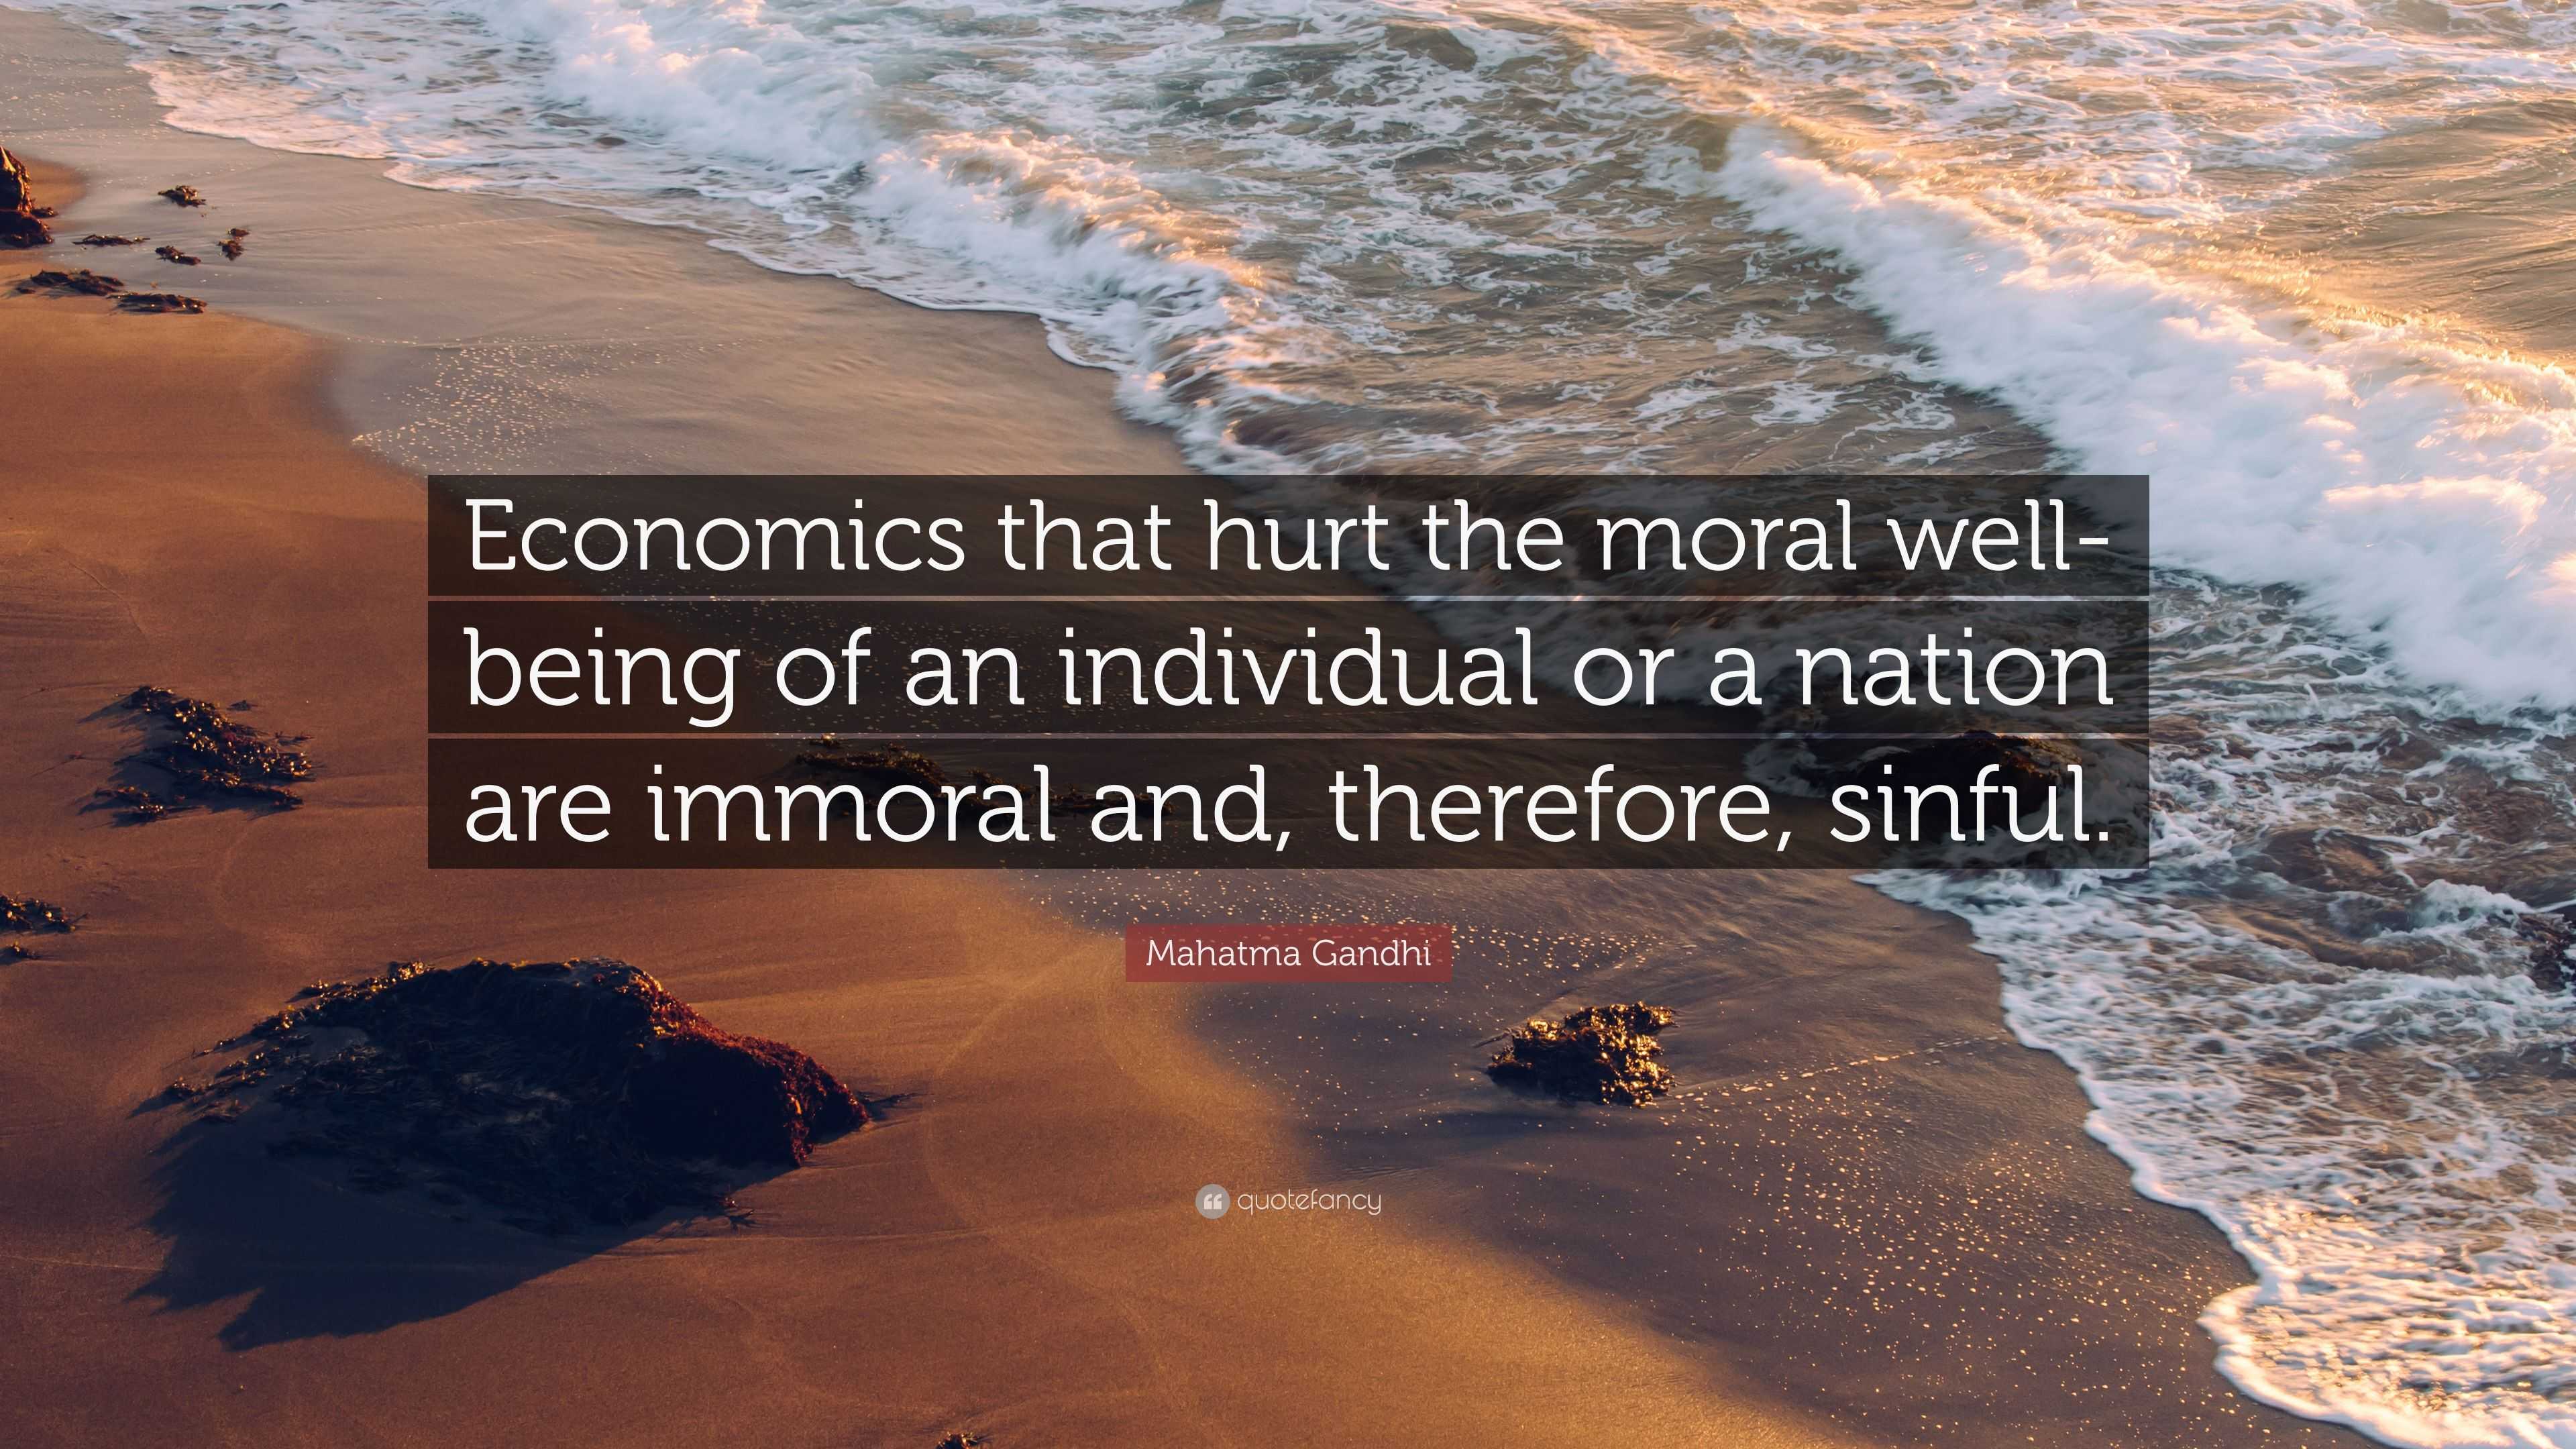 Mahatma Gandhi Quote: “Economics that hurt the moral well-being of an ...